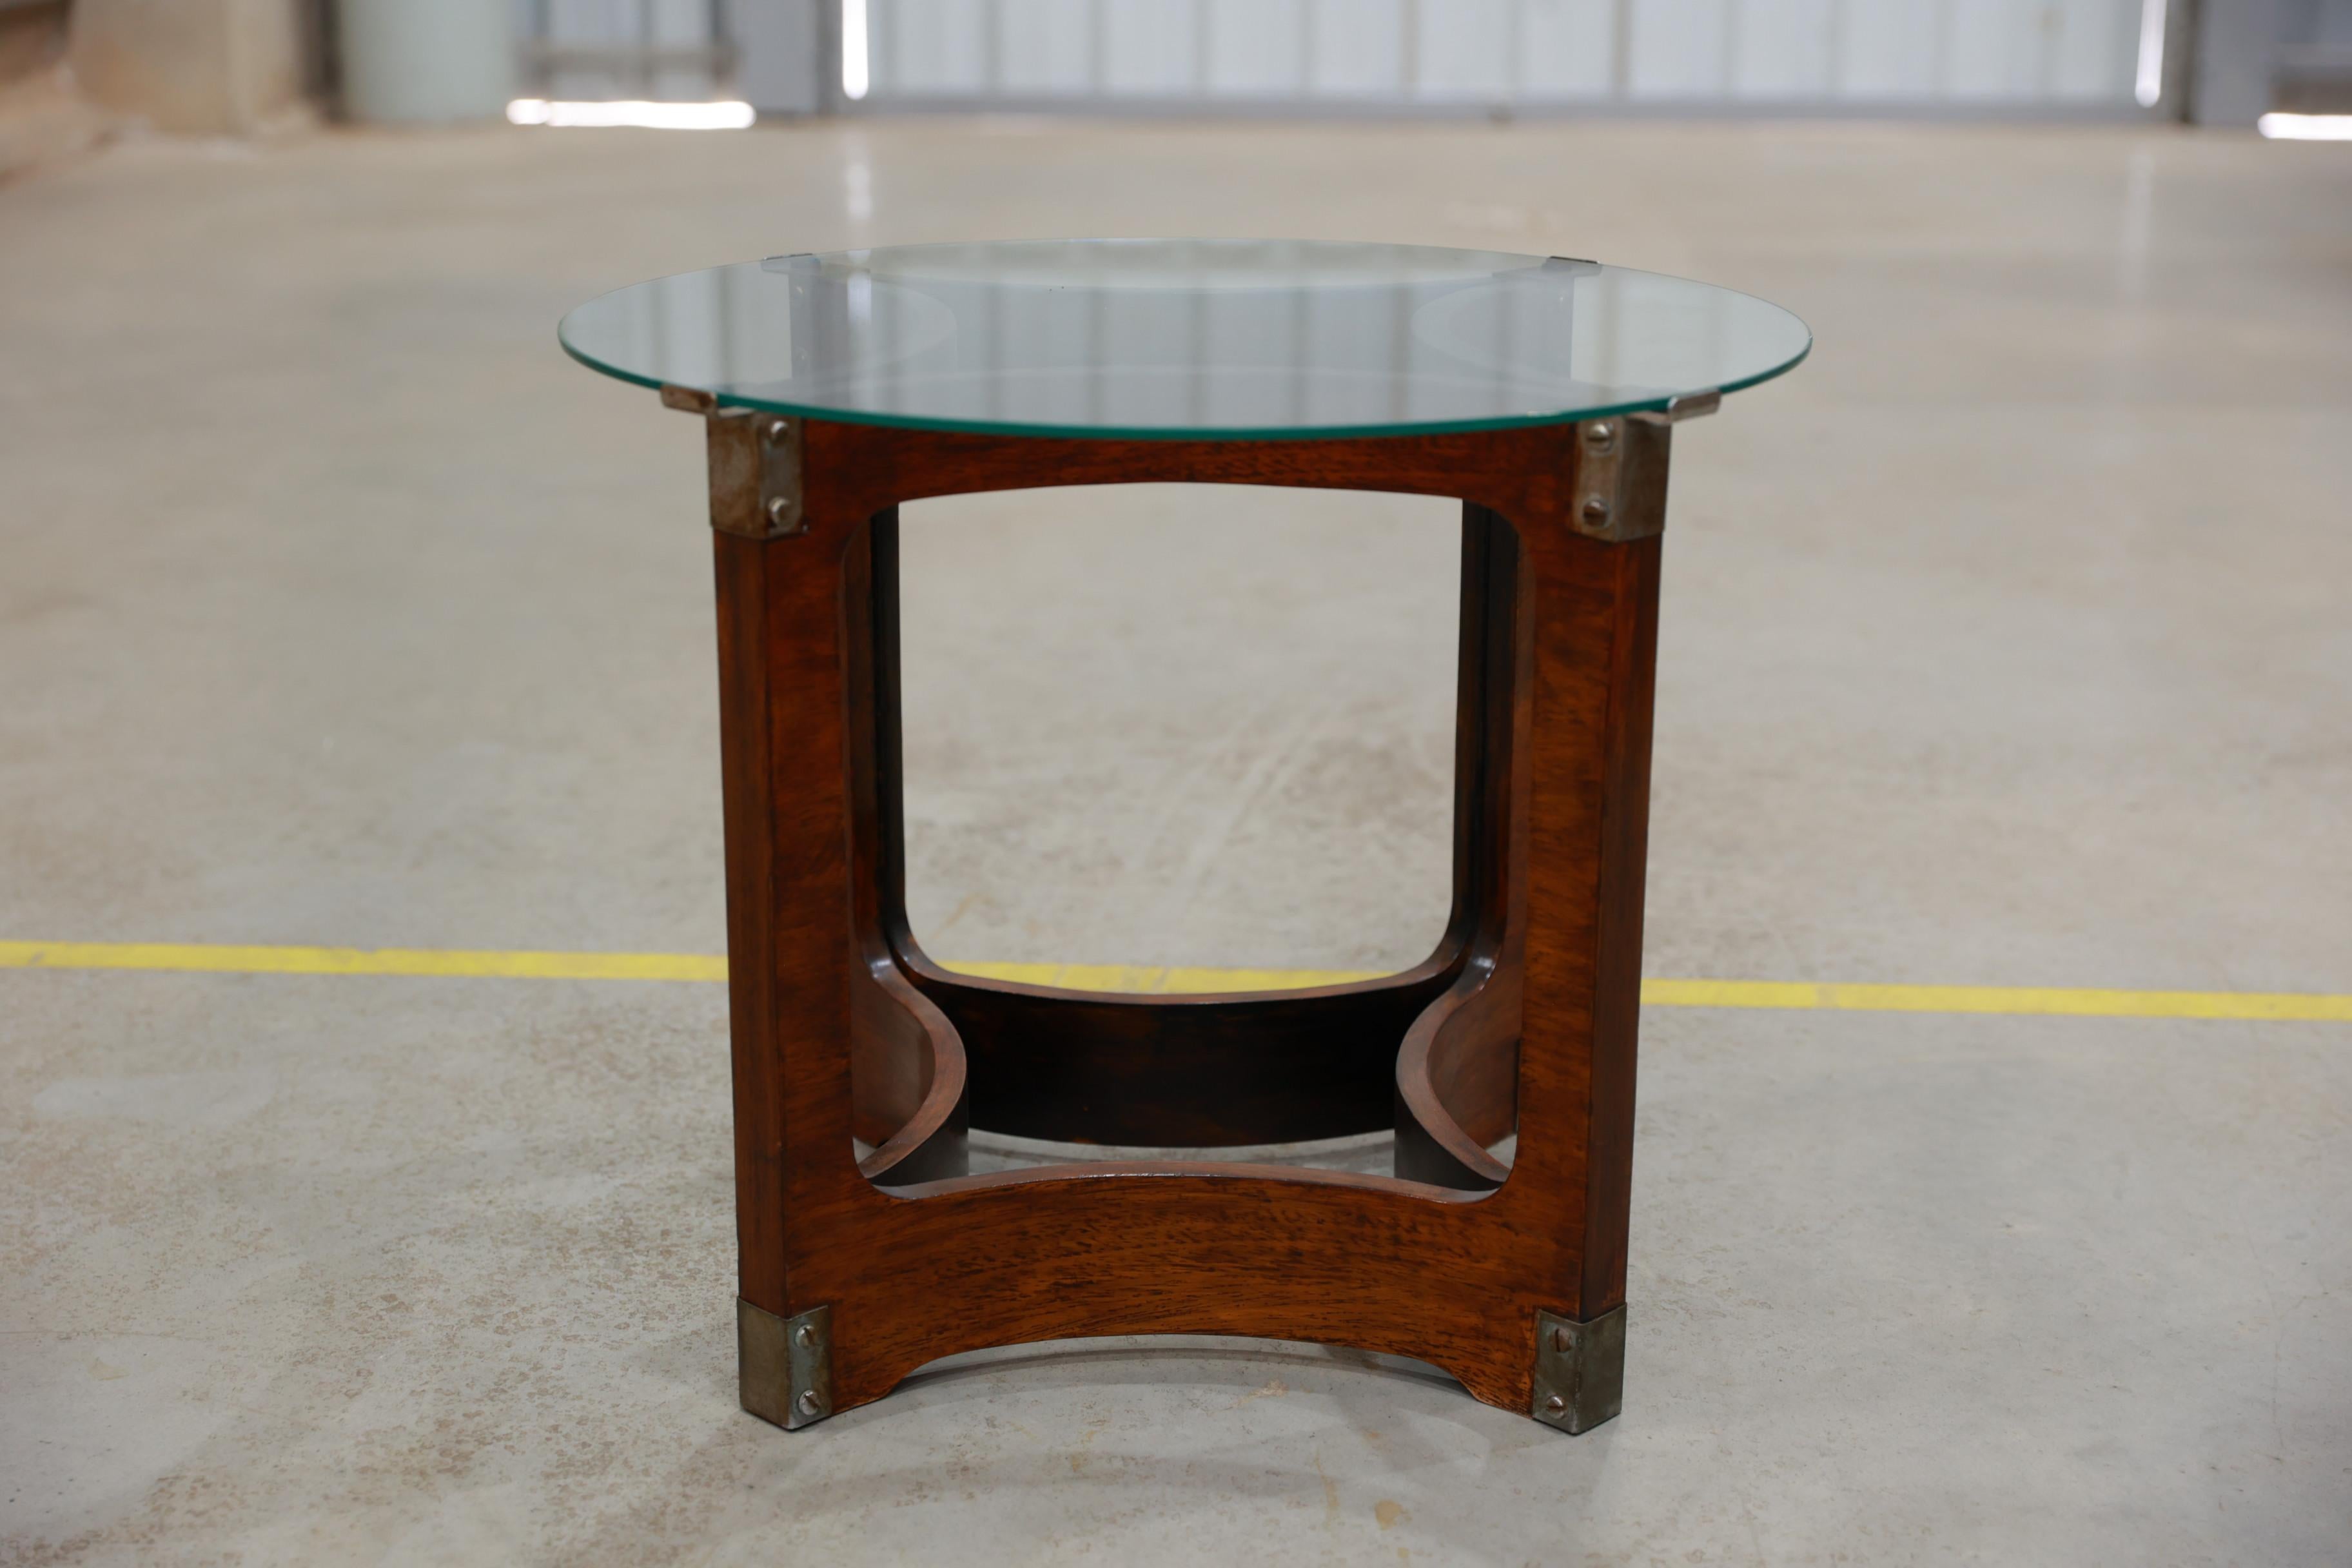 Hand-Painted Mid-Century Modern Side Table in Bentwood & Glass by Novo Rumo, 1960s, Brazil For Sale